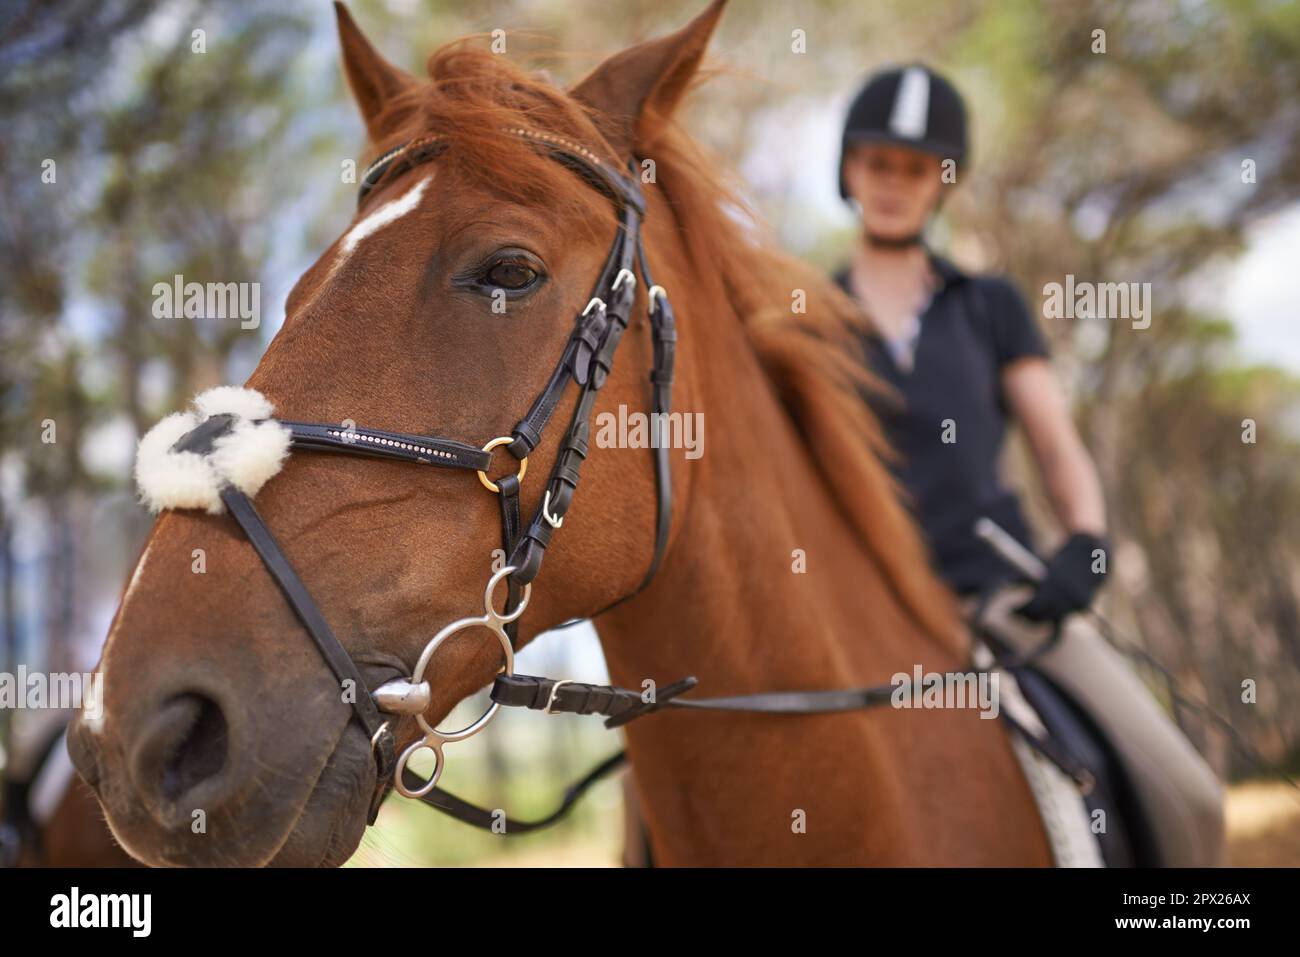 Experiencing nature on horseback. A young woman going for a ride on her chestnut horse. Stock Photo